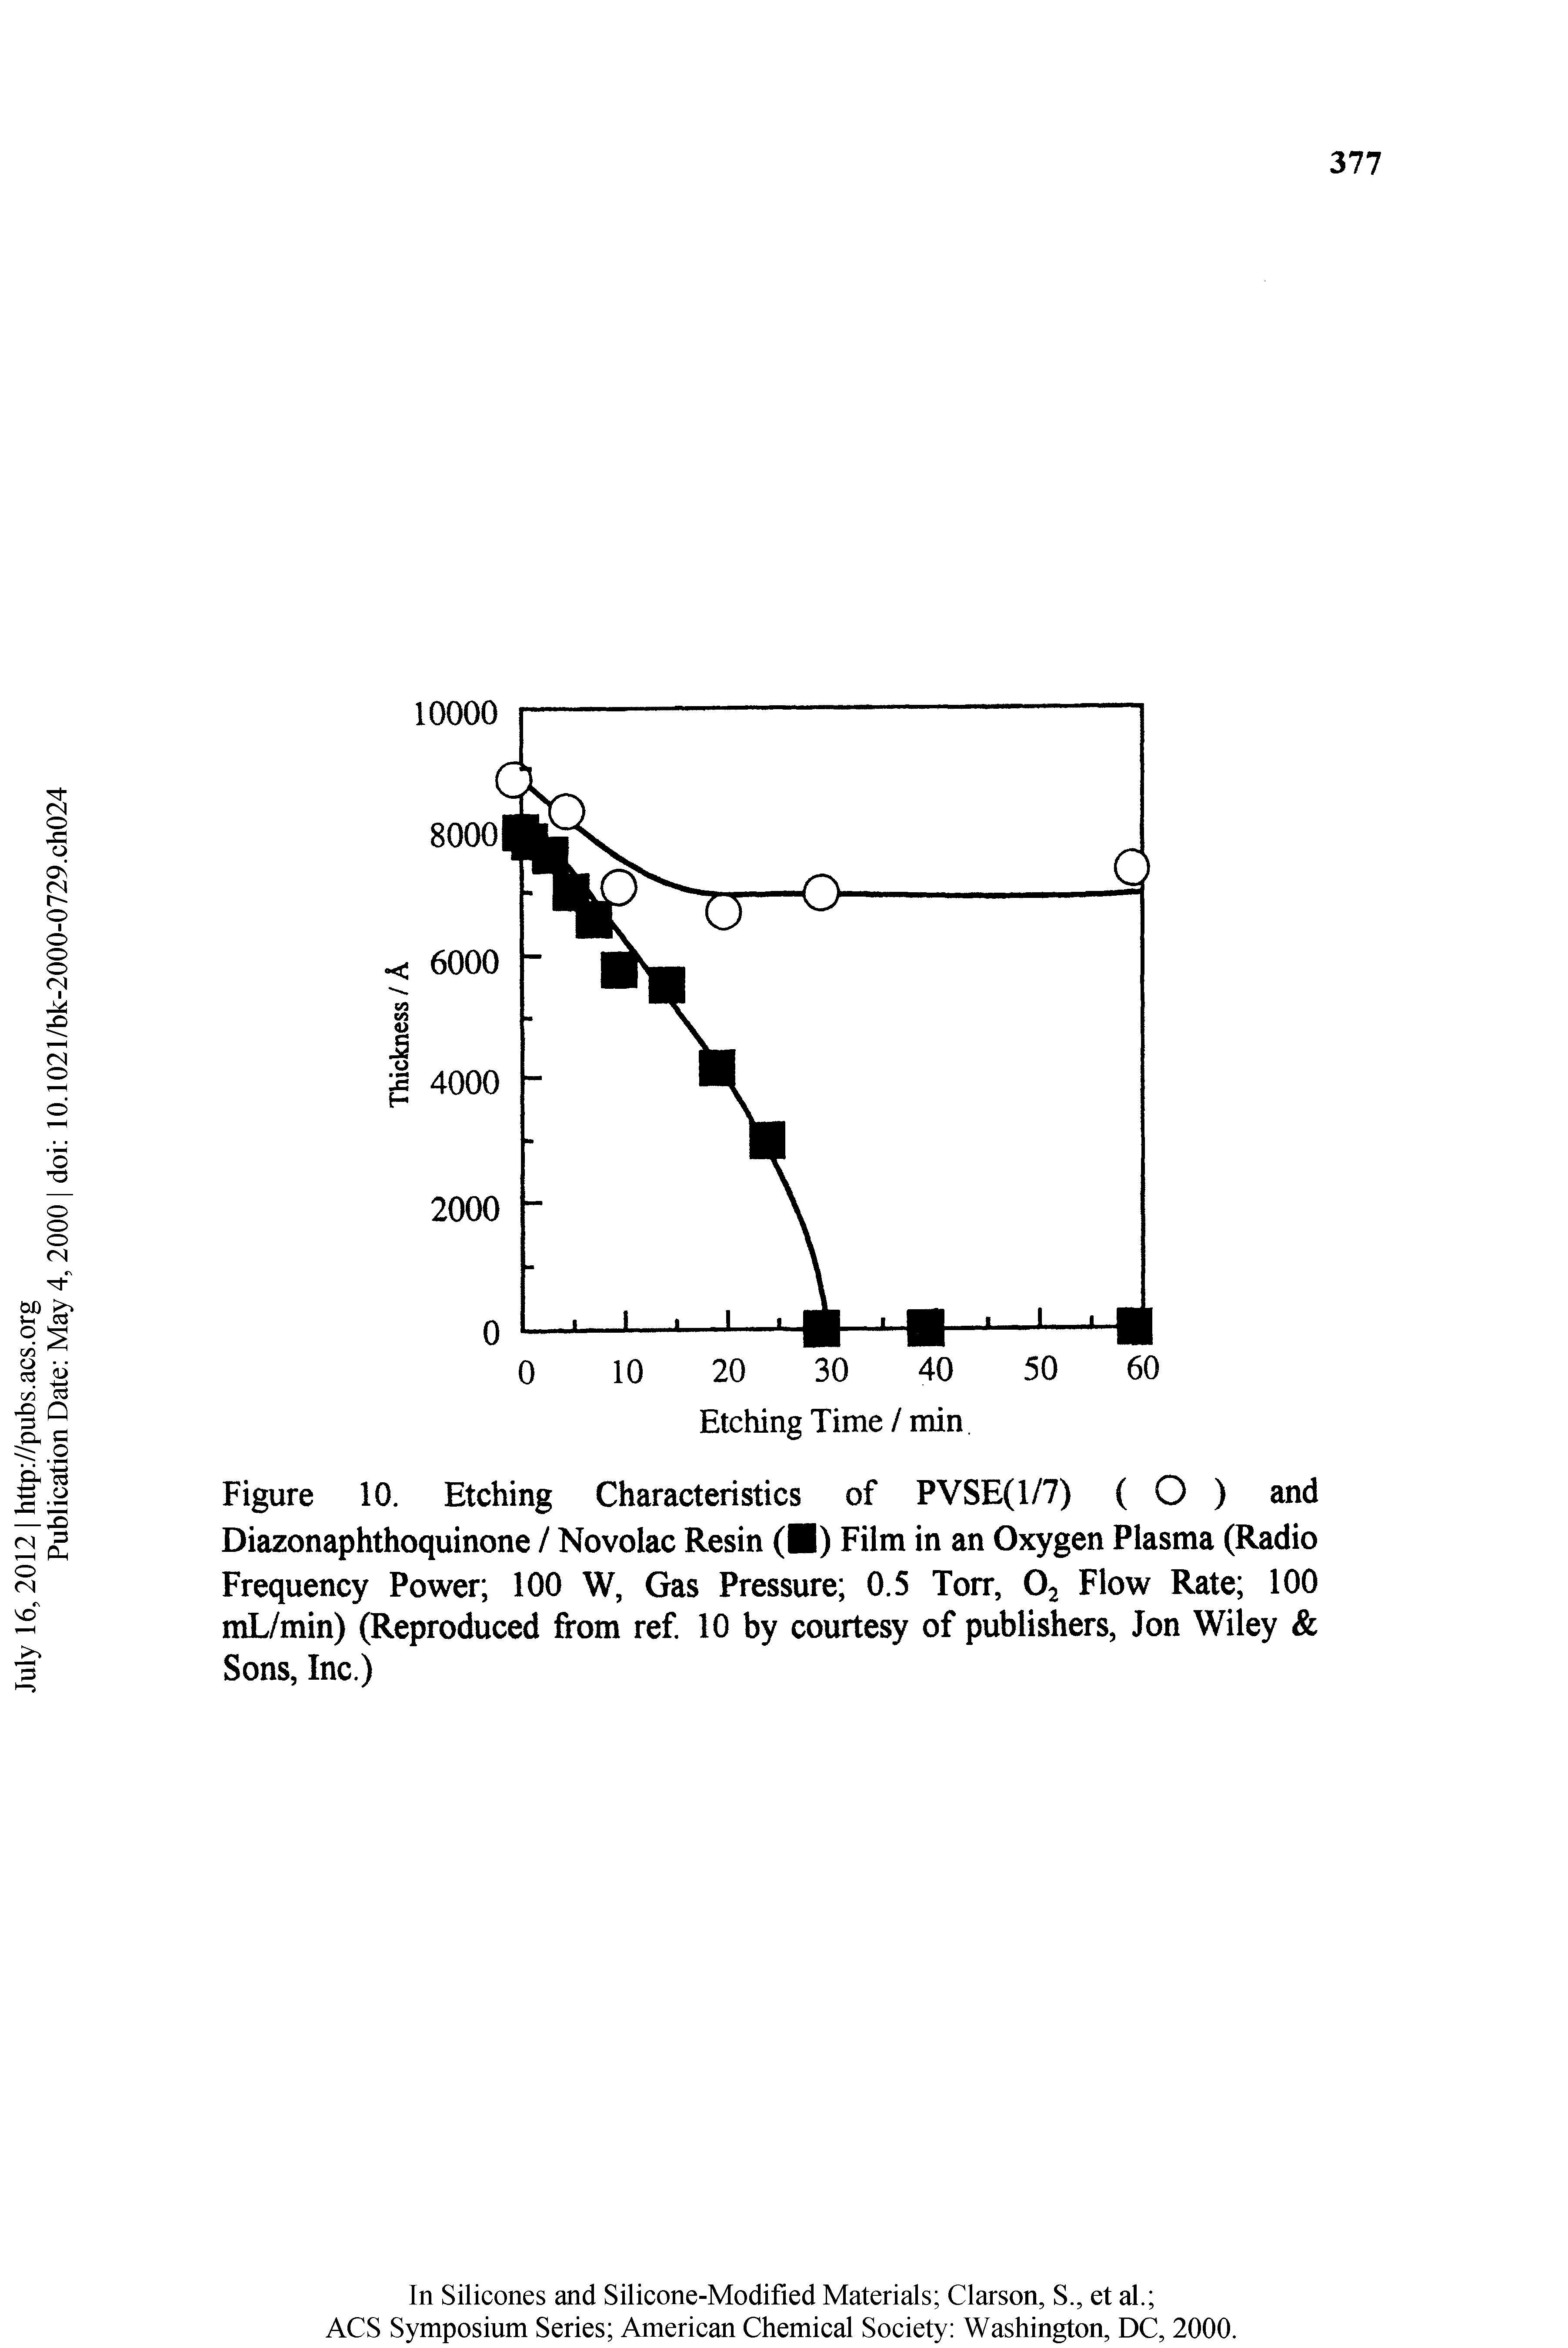 Figure 10. Etching Characteristics of PVSE(l/7) ( O ) and Diazonaphthoquinone / Novolac Resin ( ) Film in an Oxygen Plasma (Radio Frequency Power 100 W, Gas Pressure 0.5 Torr, O2 Flow Rate 100 mL/min) (Reproduced from ref 10 by courtesy of publishers, Jon Wiley Sons, Inc.)...